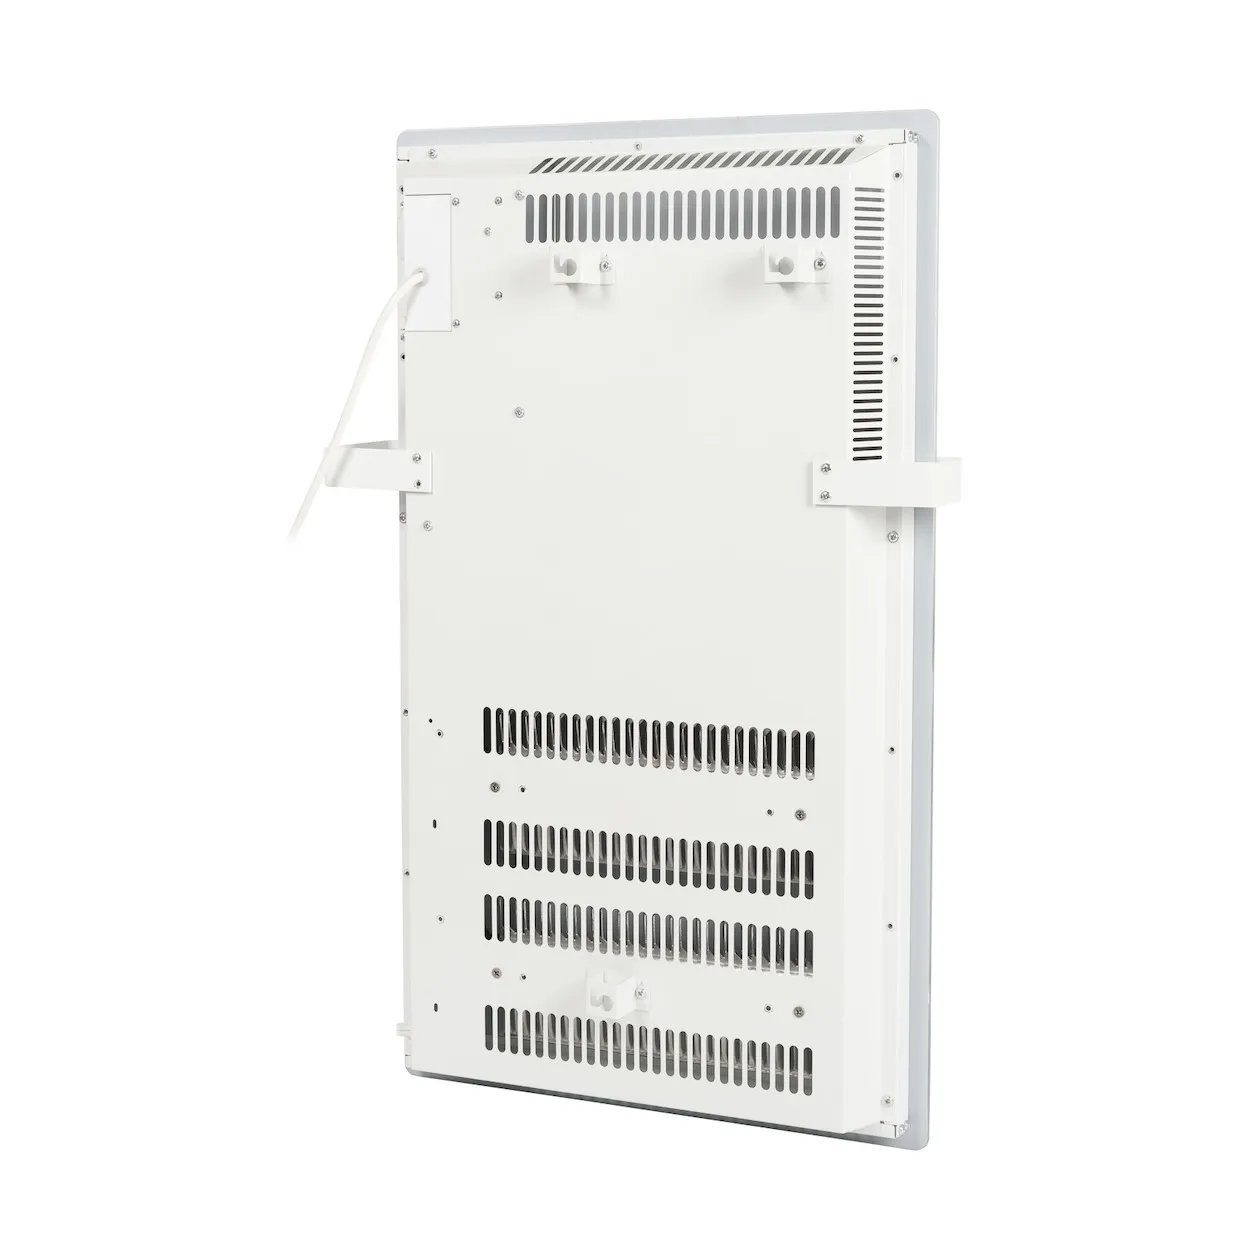 Eurom Alutherm Sani Verre 1200 WiFi Wit